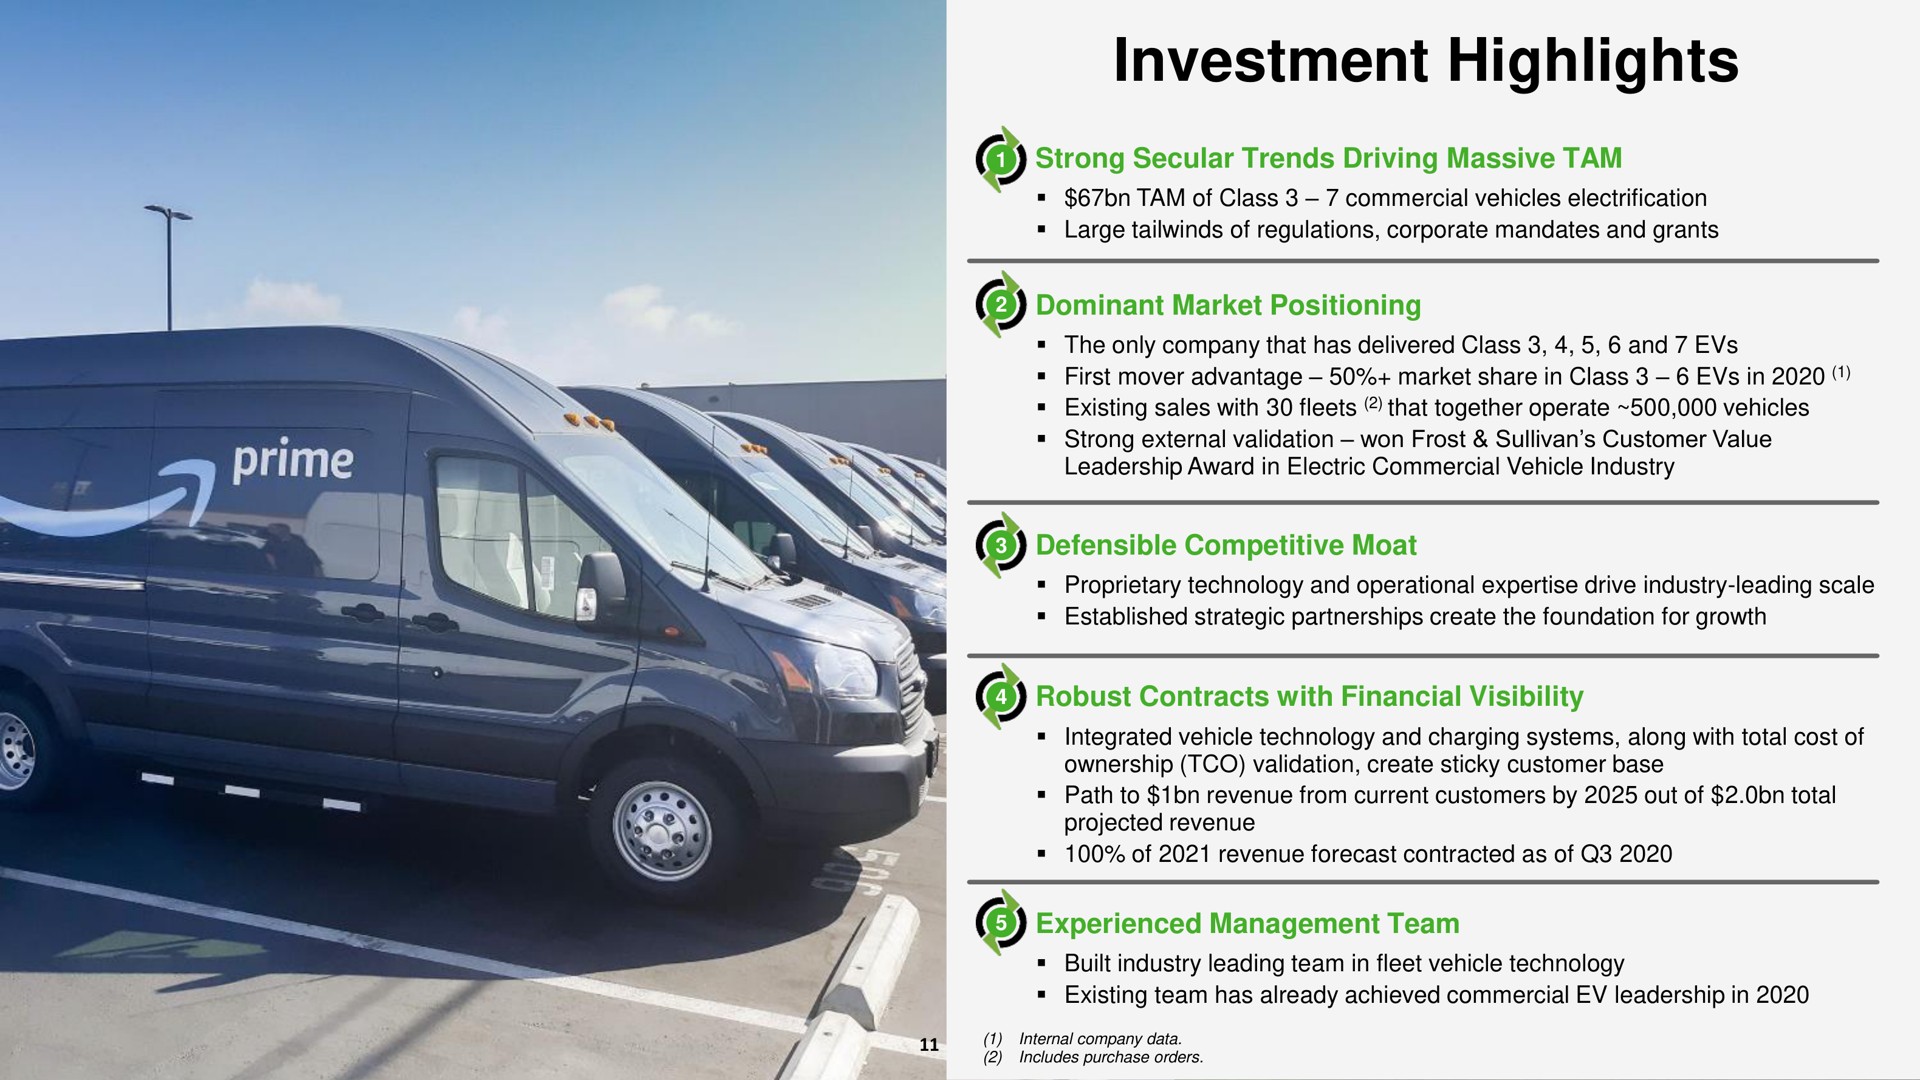 investment highlights robust contracts with financial visibility | Lightning eMotors